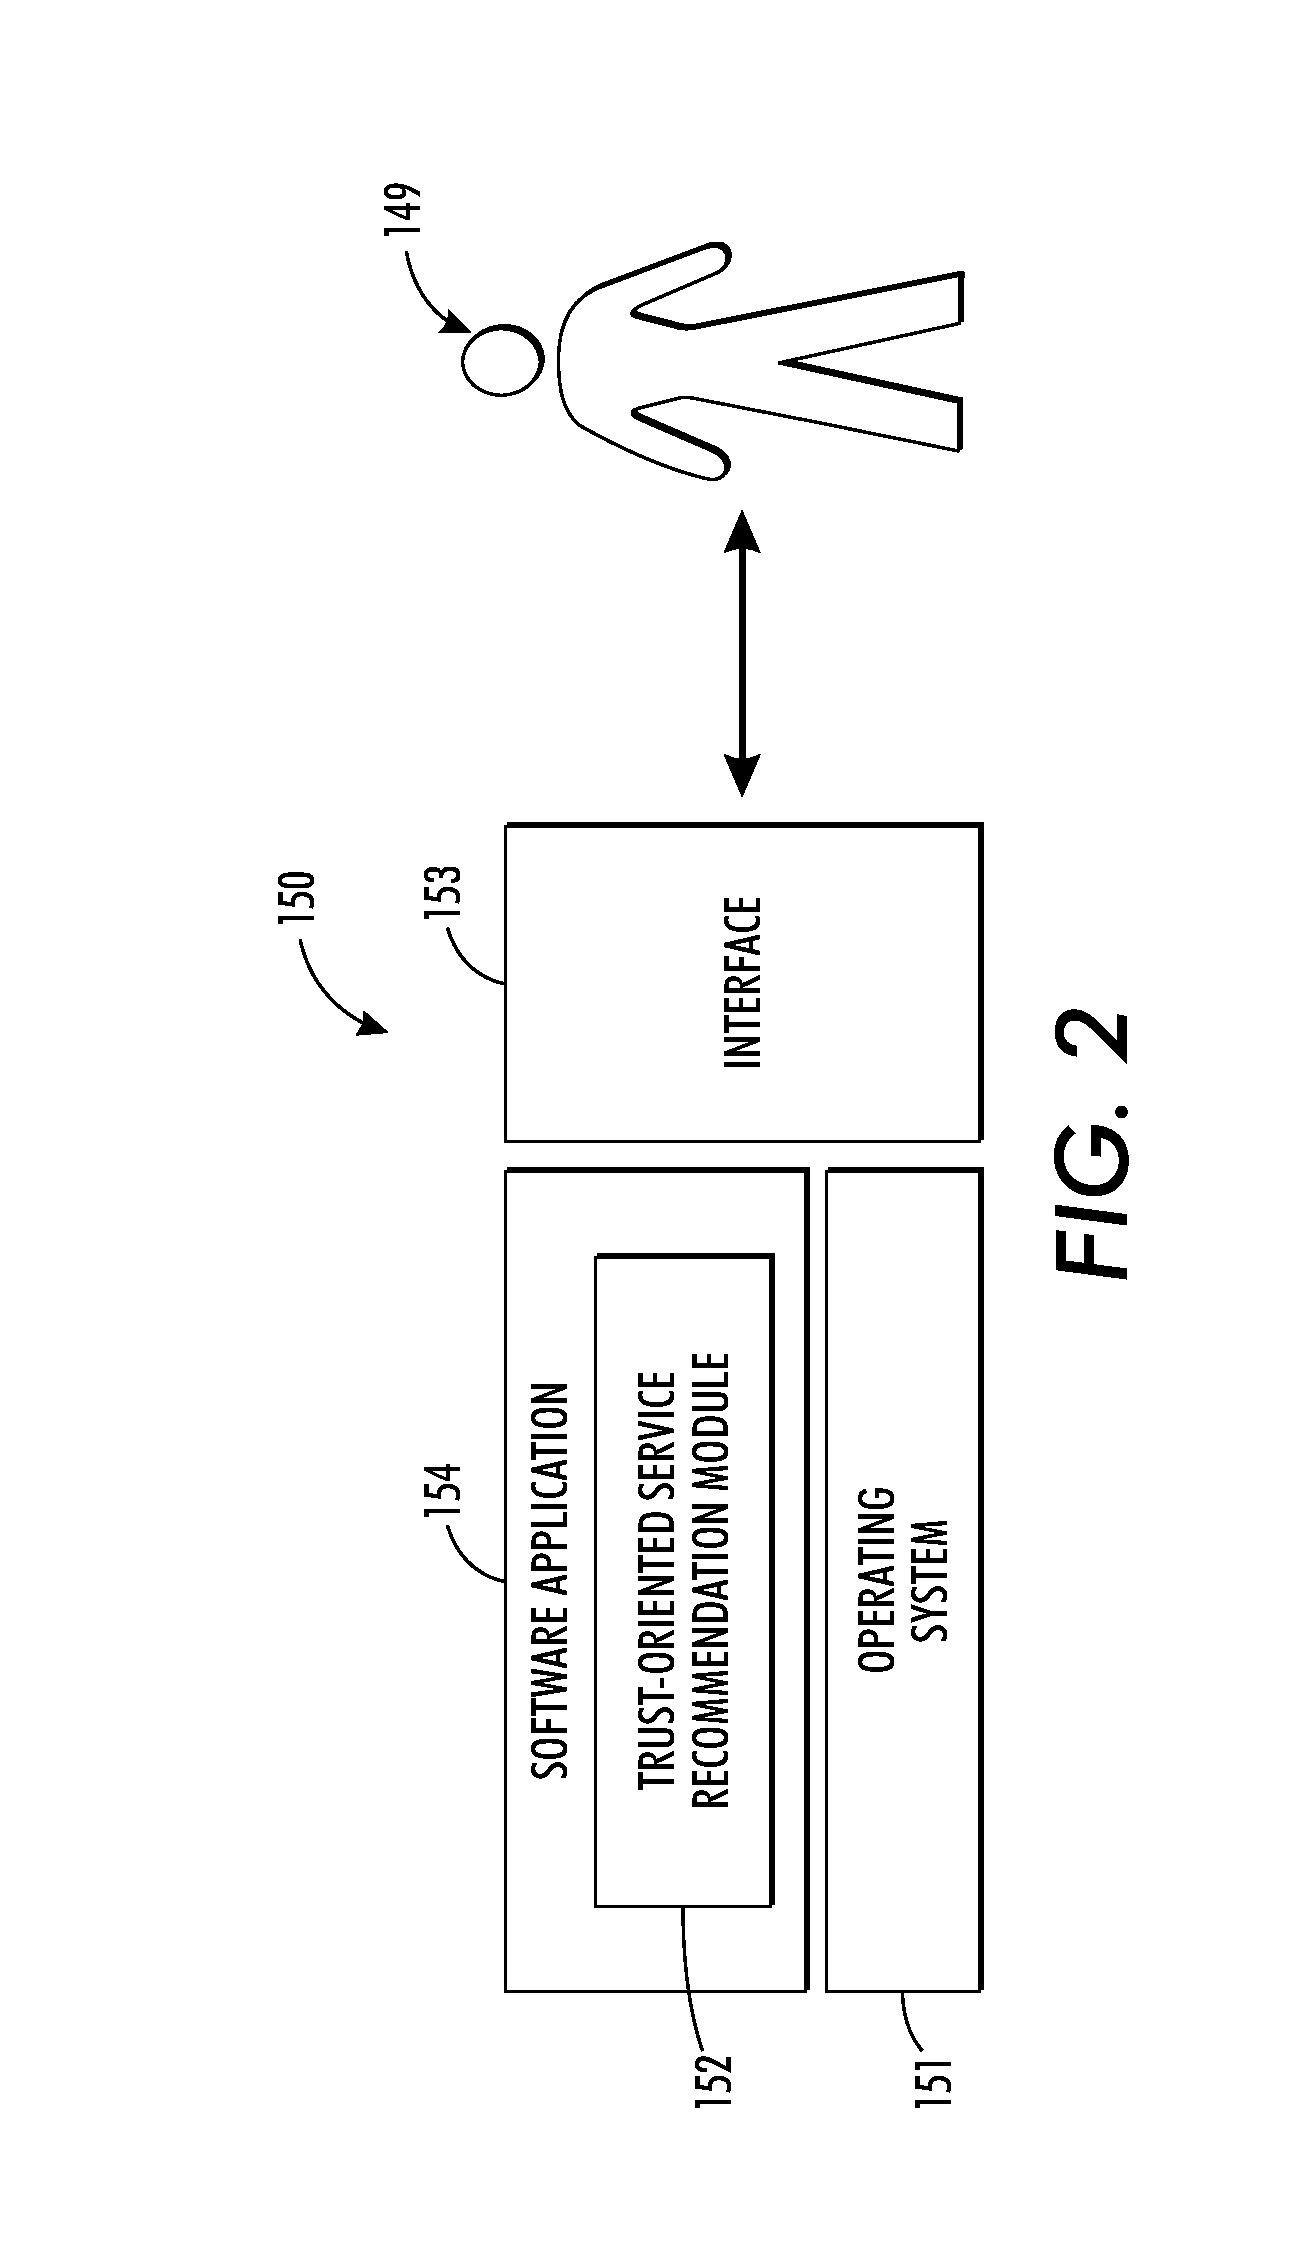 Methods and systems for recommending services based on an electronic social media trust model